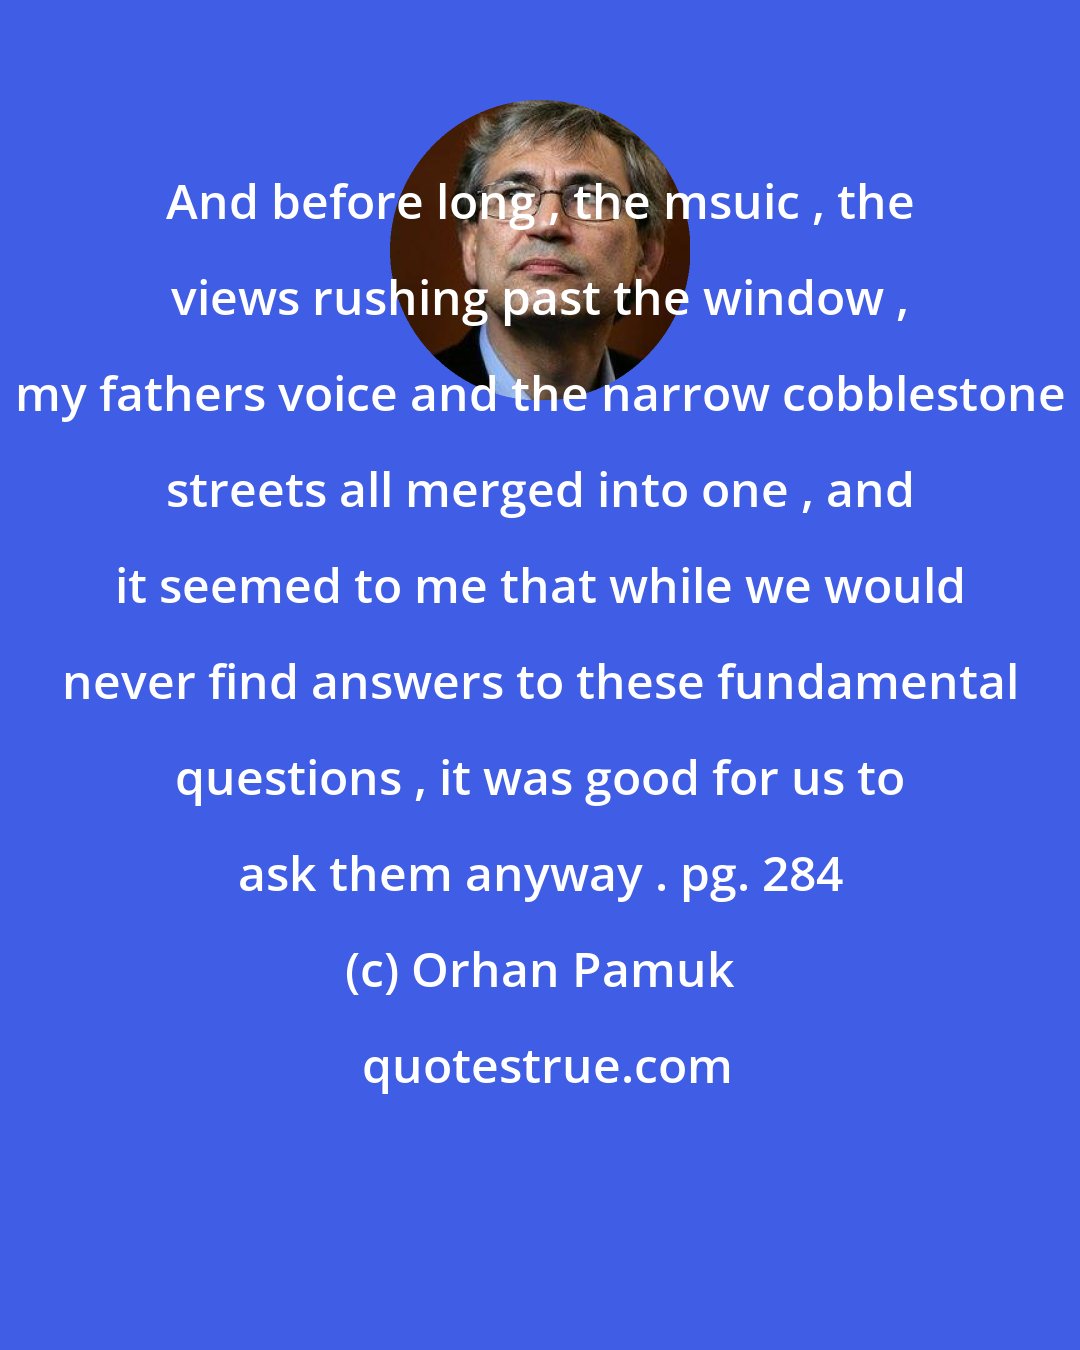 Orhan Pamuk: And before long , the msuic , the views rushing past the window , my fathers voice and the narrow cobblestone streets all merged into one , and it seemed to me that while we would never find answers to these fundamental questions , it was good for us to ask them anyway . pg. 284